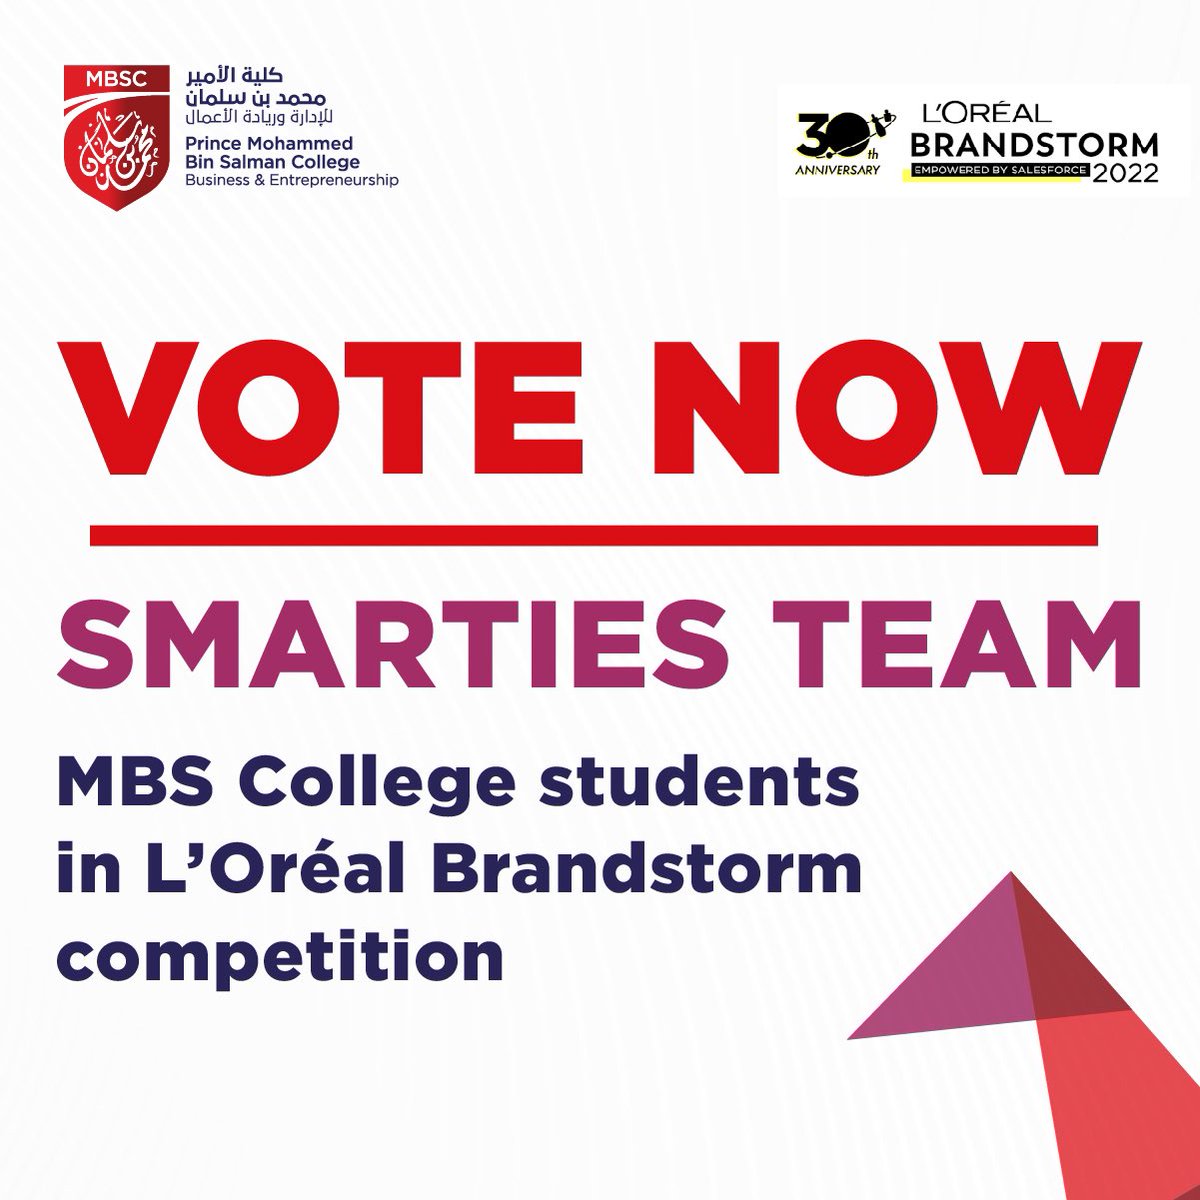 MBS College students have been participating in the Annual L’Oréal  Brandstorm competition as part of the Integrated Innovation Project. 
The MBSC SMARTIES team in the Inclusion Track need your support to get them to the final stage in Paris. 
Vote Now: bit.ly/3w6qTsw